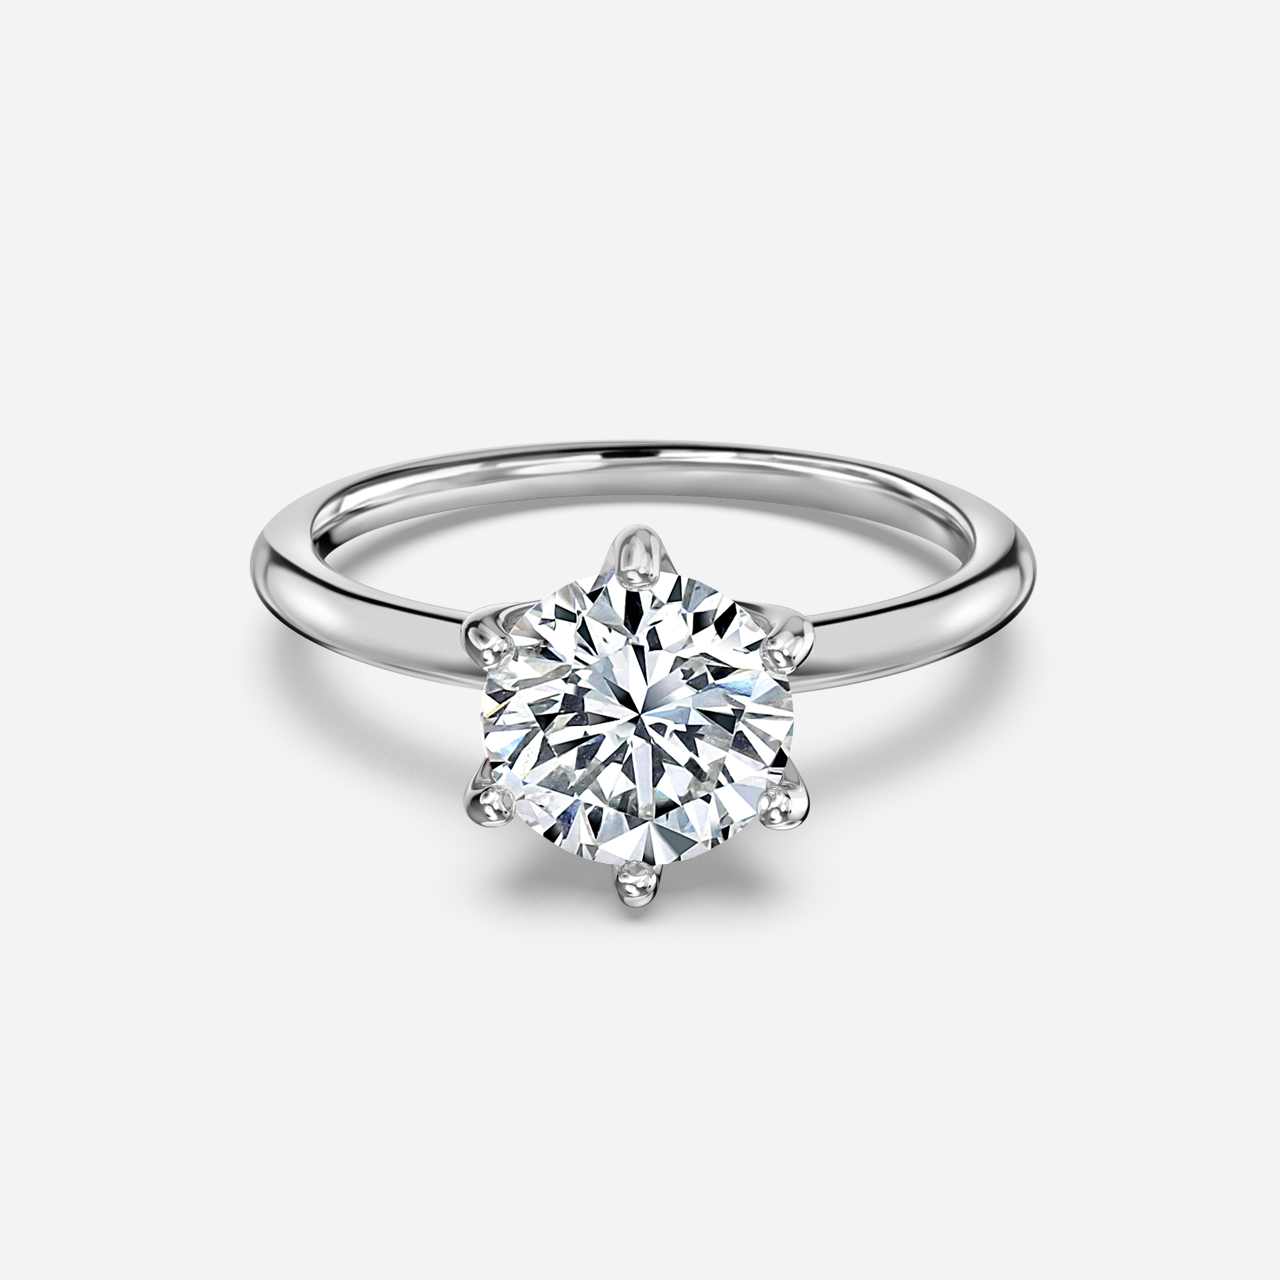 Favian White Gold Solitaire Engagement Ring